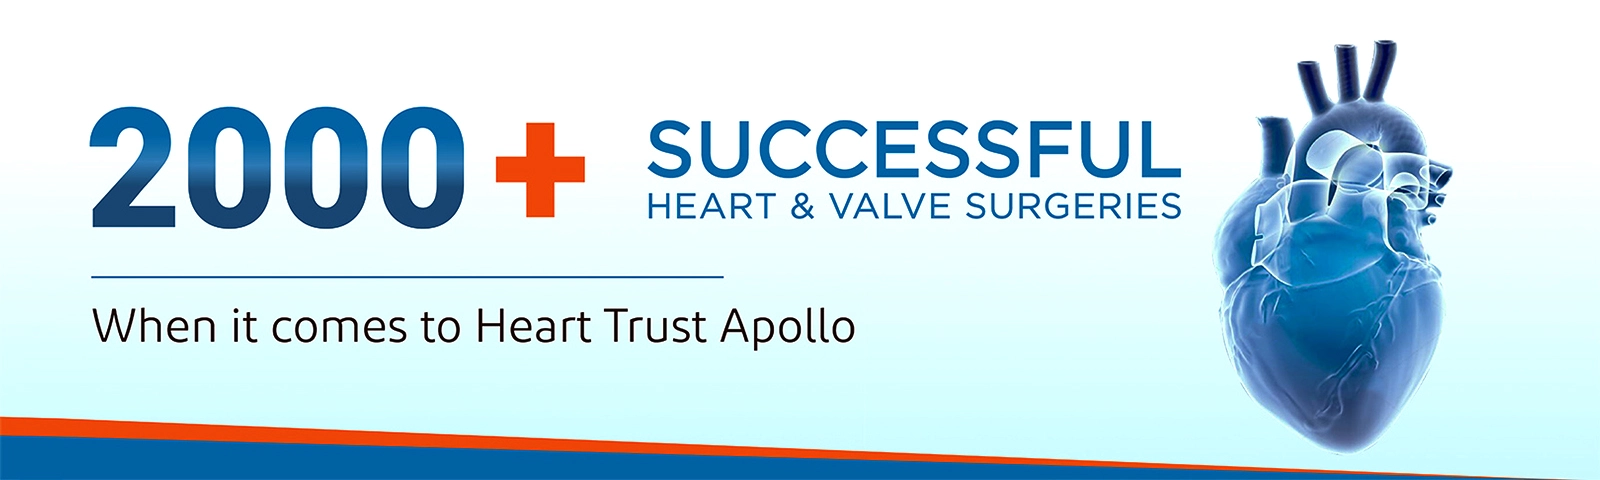 2000-Successful-Heart-and-Valve-Surgeries